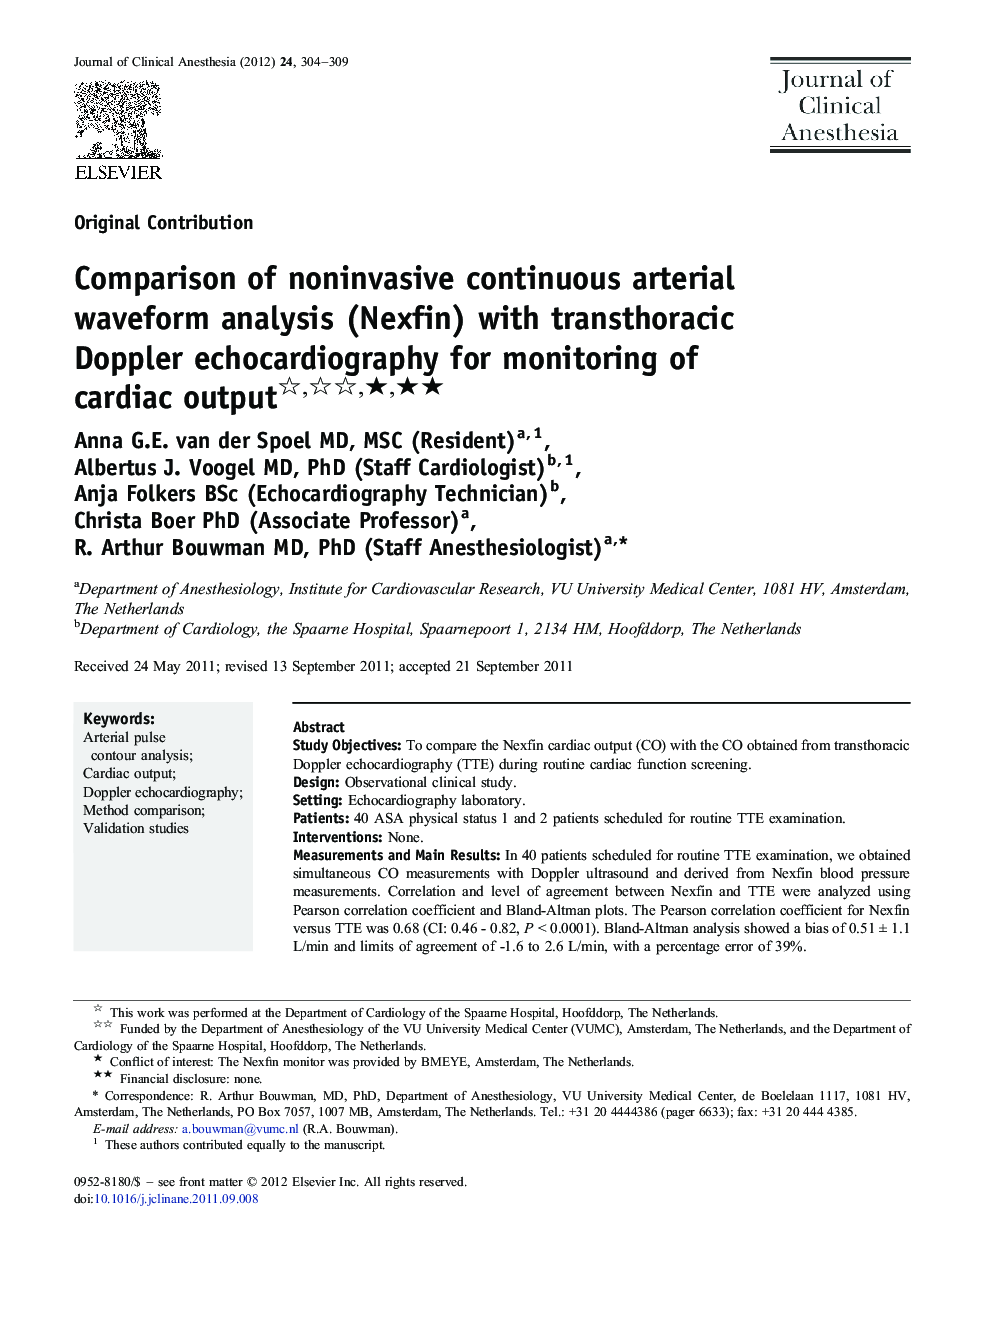 Comparison of noninvasive continuous arterial waveform analysis (Nexfin) with transthoracic Doppler echocardiography for monitoring of cardiac output